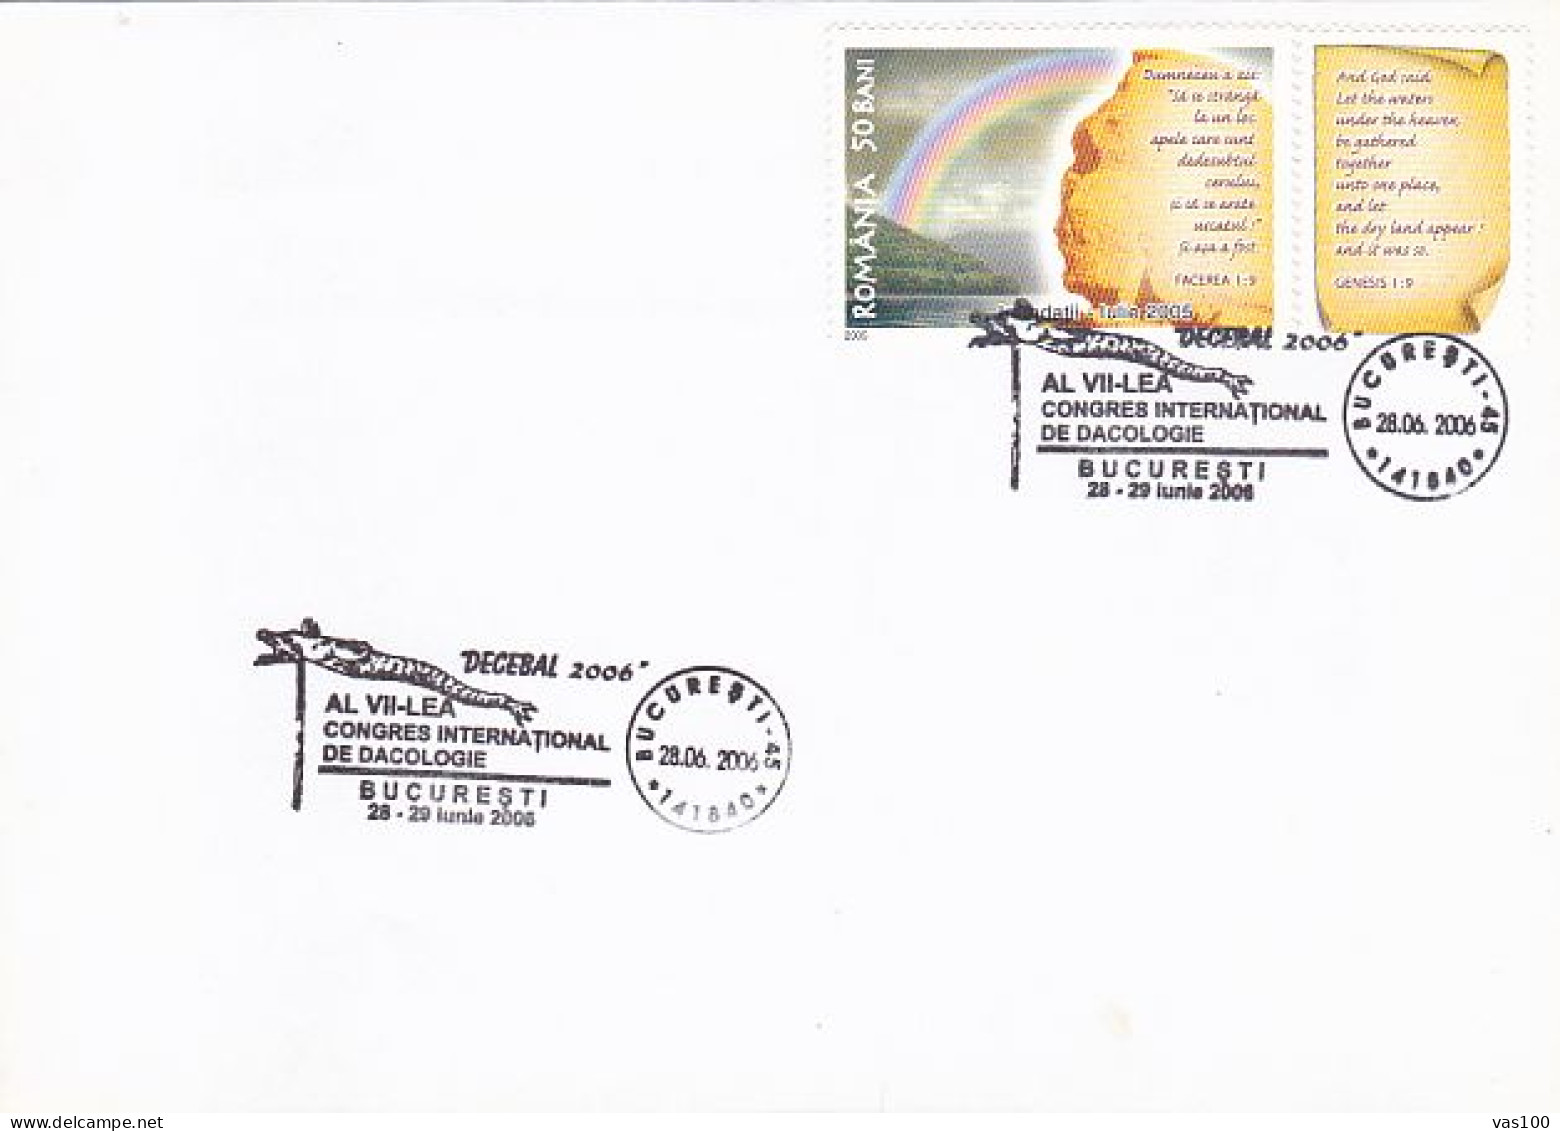 BUCHAREST DACOLOGY CONGRESS POSTMARKS, 2005 FLOODS STAMP ON COVER, 2006, ROMANIA - Covers & Documents